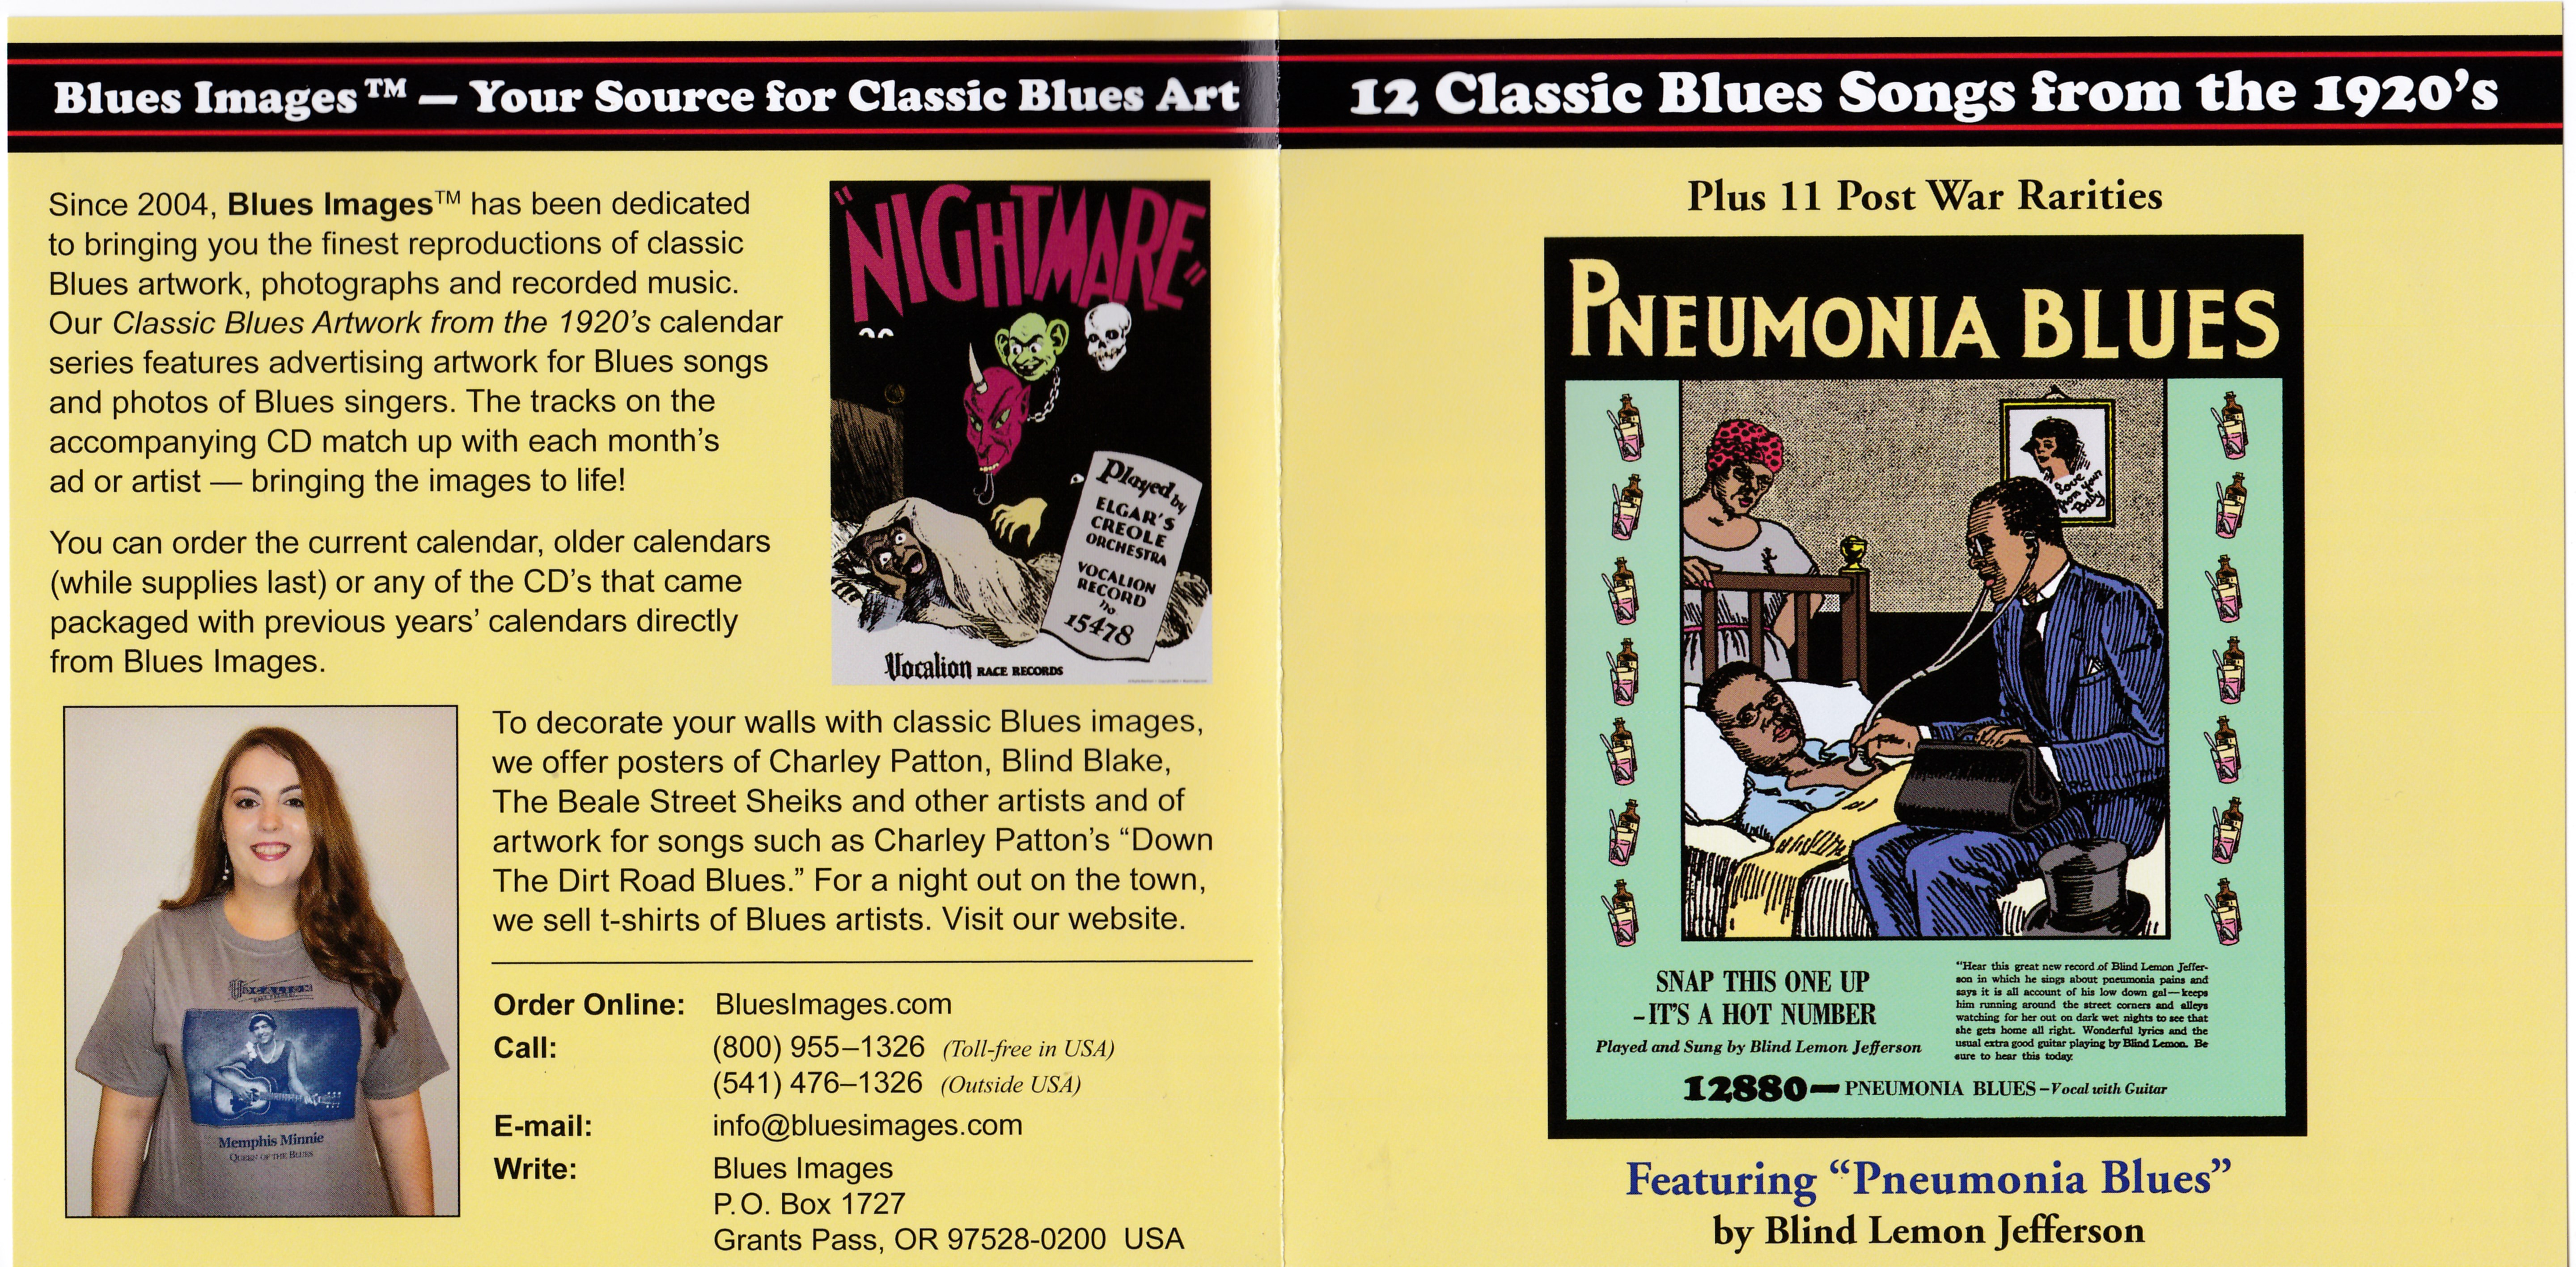 Blues Images Present    23 Classic Blues Songs from the 1920's, Vol  18